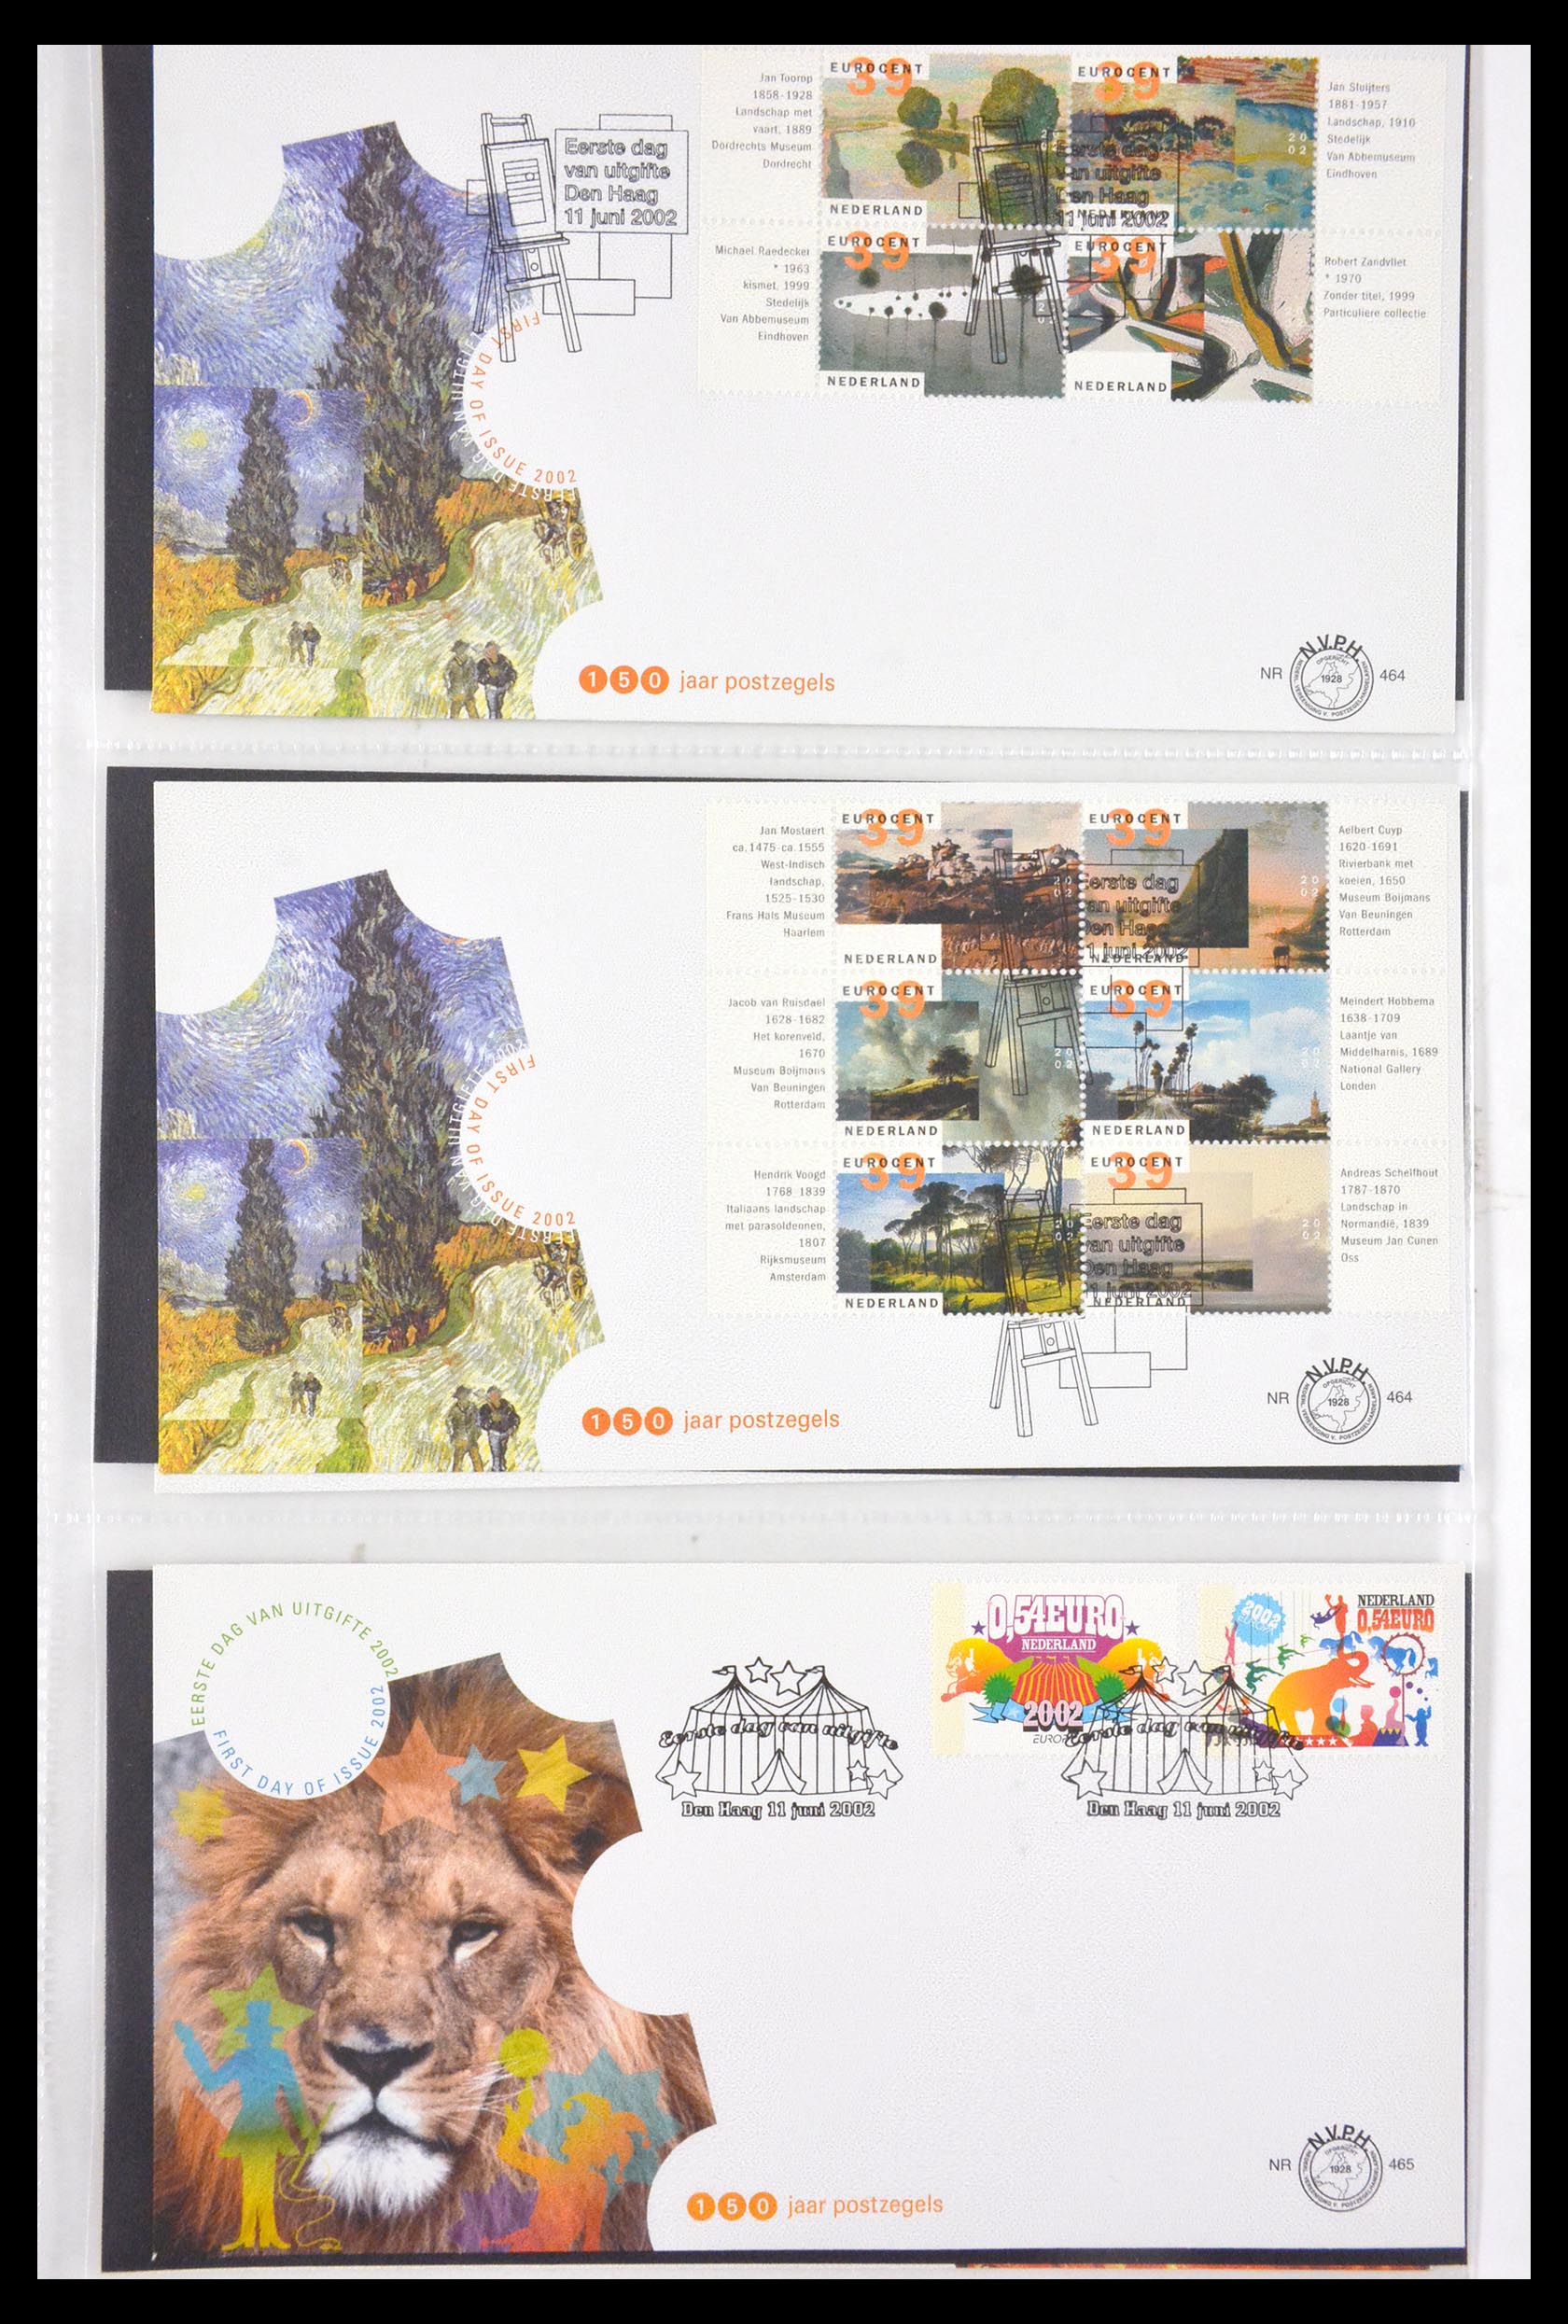 29850 011 - 29850 Netherlands FDC's 2001-2012.